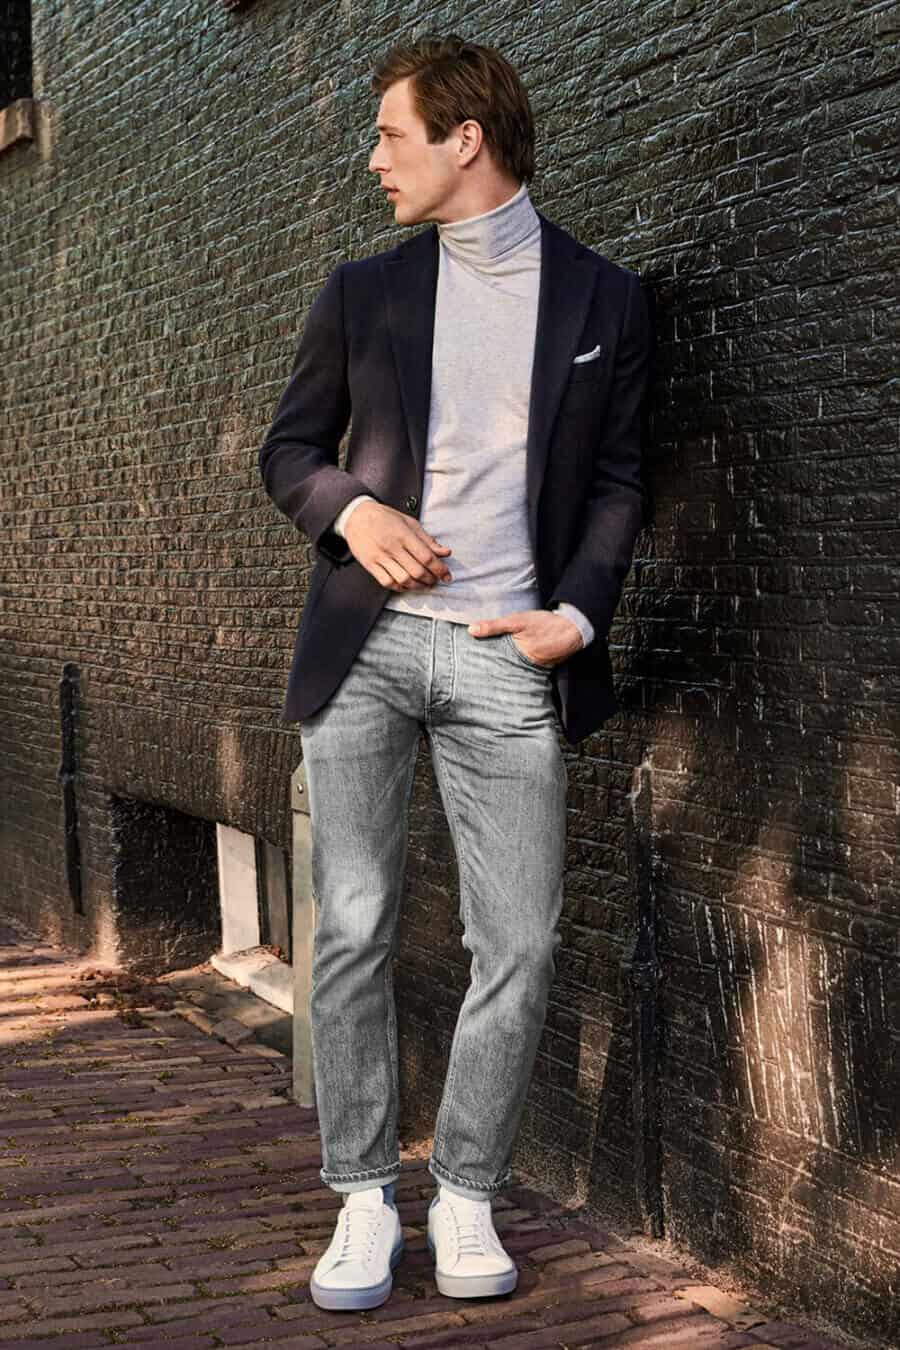 Men's turtleneck outfit for creative office with blazer, k jeans and white sneakers